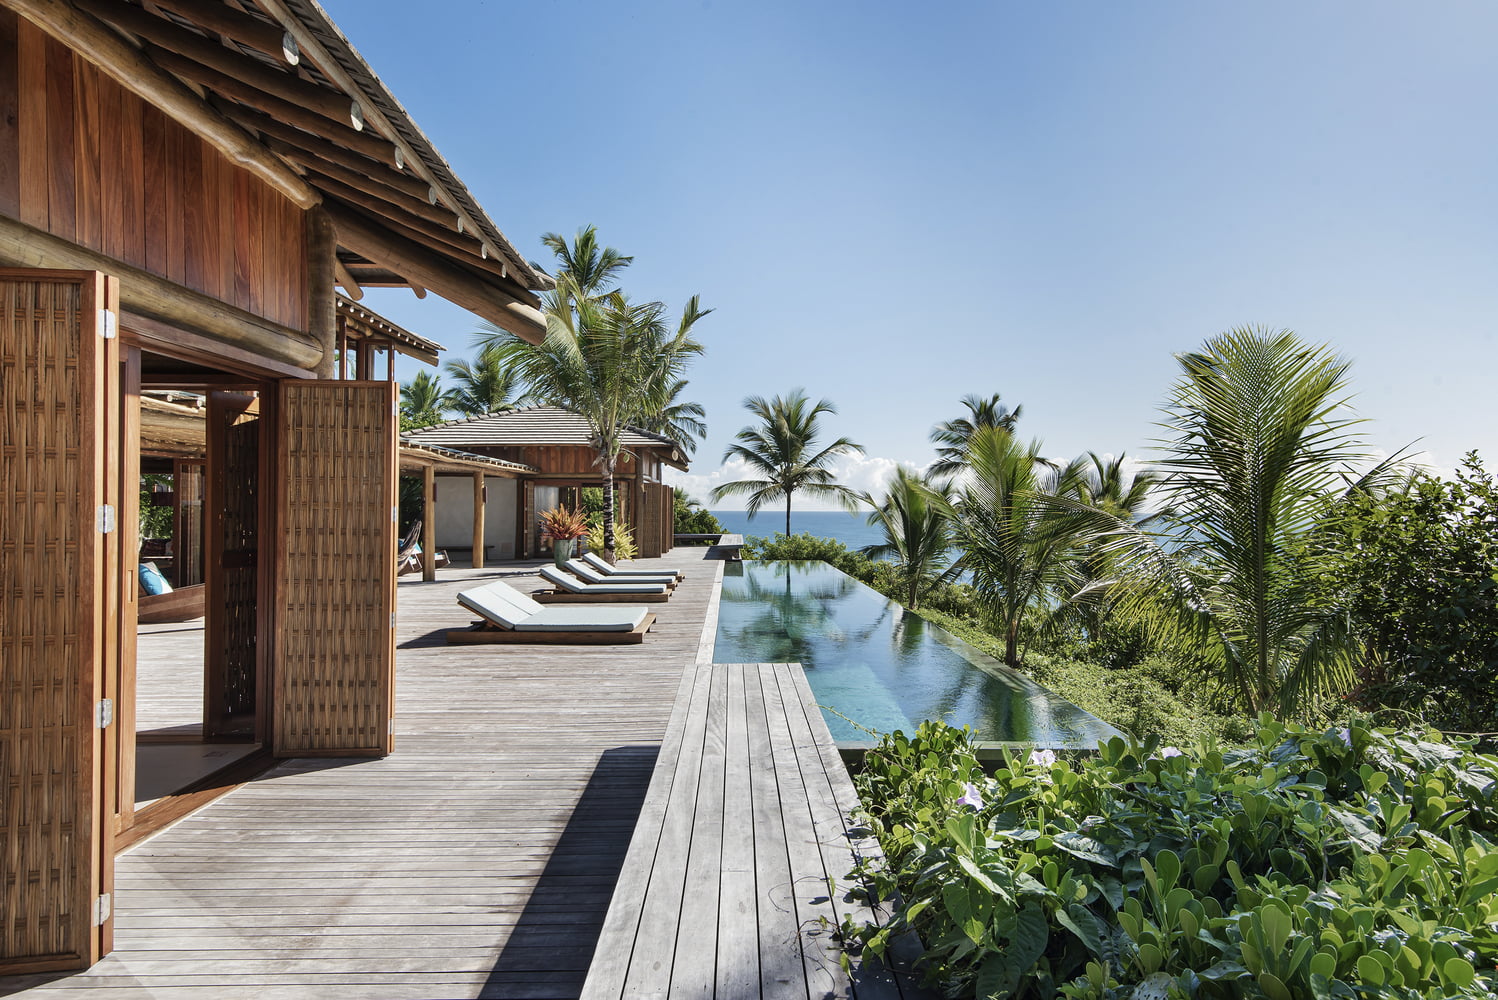 The Most Beautiful Hotels Featuring Bamboo